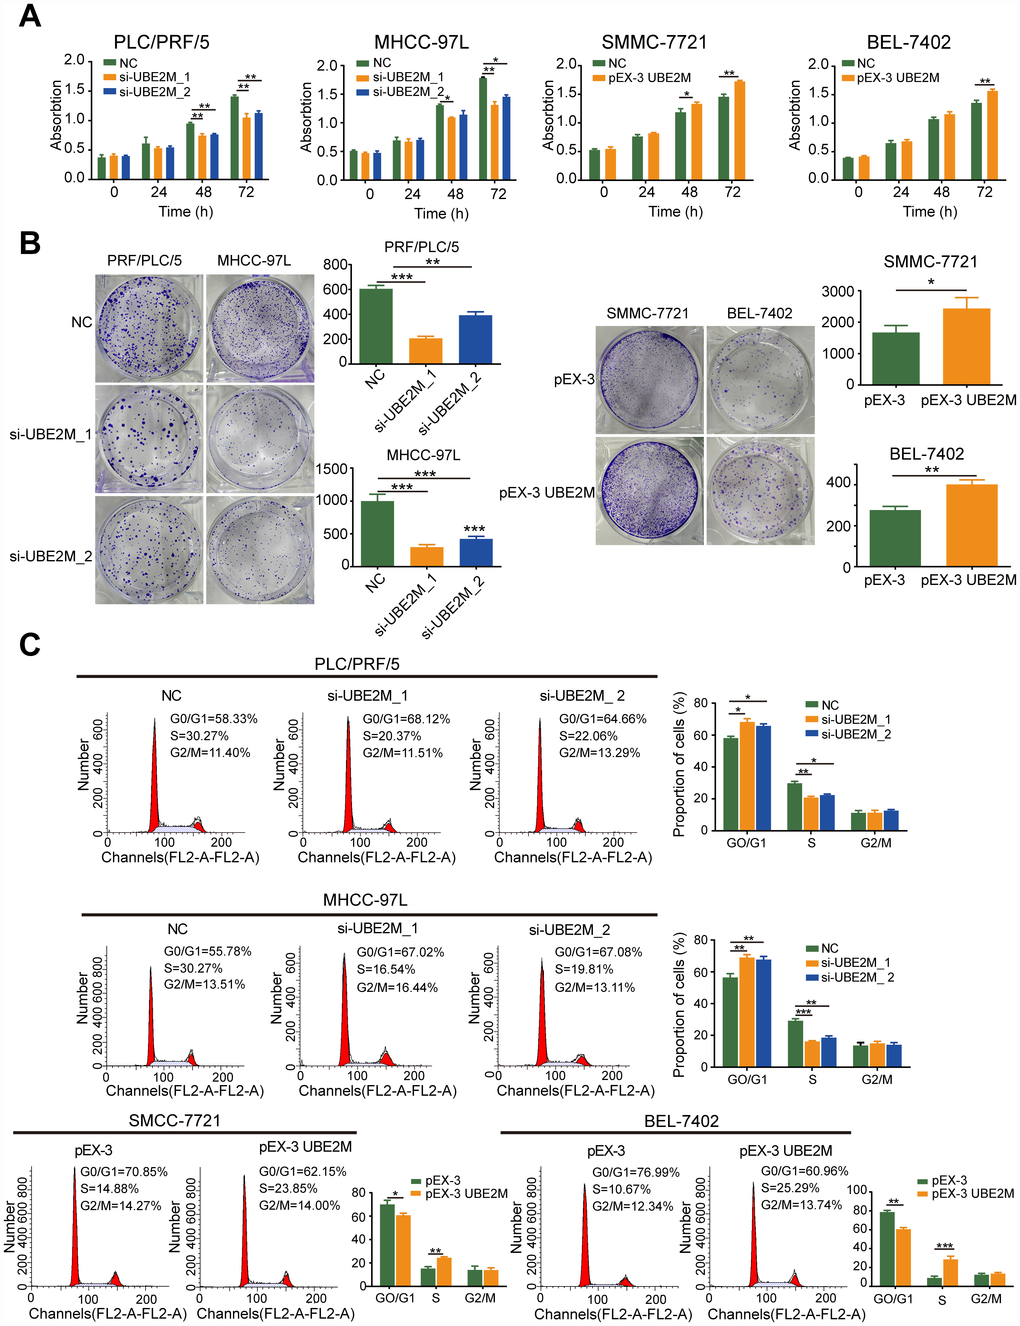 UBE2M promotes cell proliferation in vitro. (A) UBE2M knockdown significantly inhibited growth rate in UBE2M-silencing PLC/PRF/5 and MHCC-97L cells, while UBE2M overexpression significantly promoted growth rate in UBE2M-overexpressing SMCC-7721 and BEL-7402 cells, as revealed by CCK-8 assay. (B) The mean colony number was drastically reduced in UBE2M-silencing cells and was significantly increased in UBE2M-overexpressing cells, as determined by colony formation assay. (C) UBE2M knockdown significantly inhibited G1/S transition, while UBE2M overexpression remarkably induced G1/S transition, as measured by flow cytometry. Data were presented as mean ± SD (n=3). *P P P t-test).